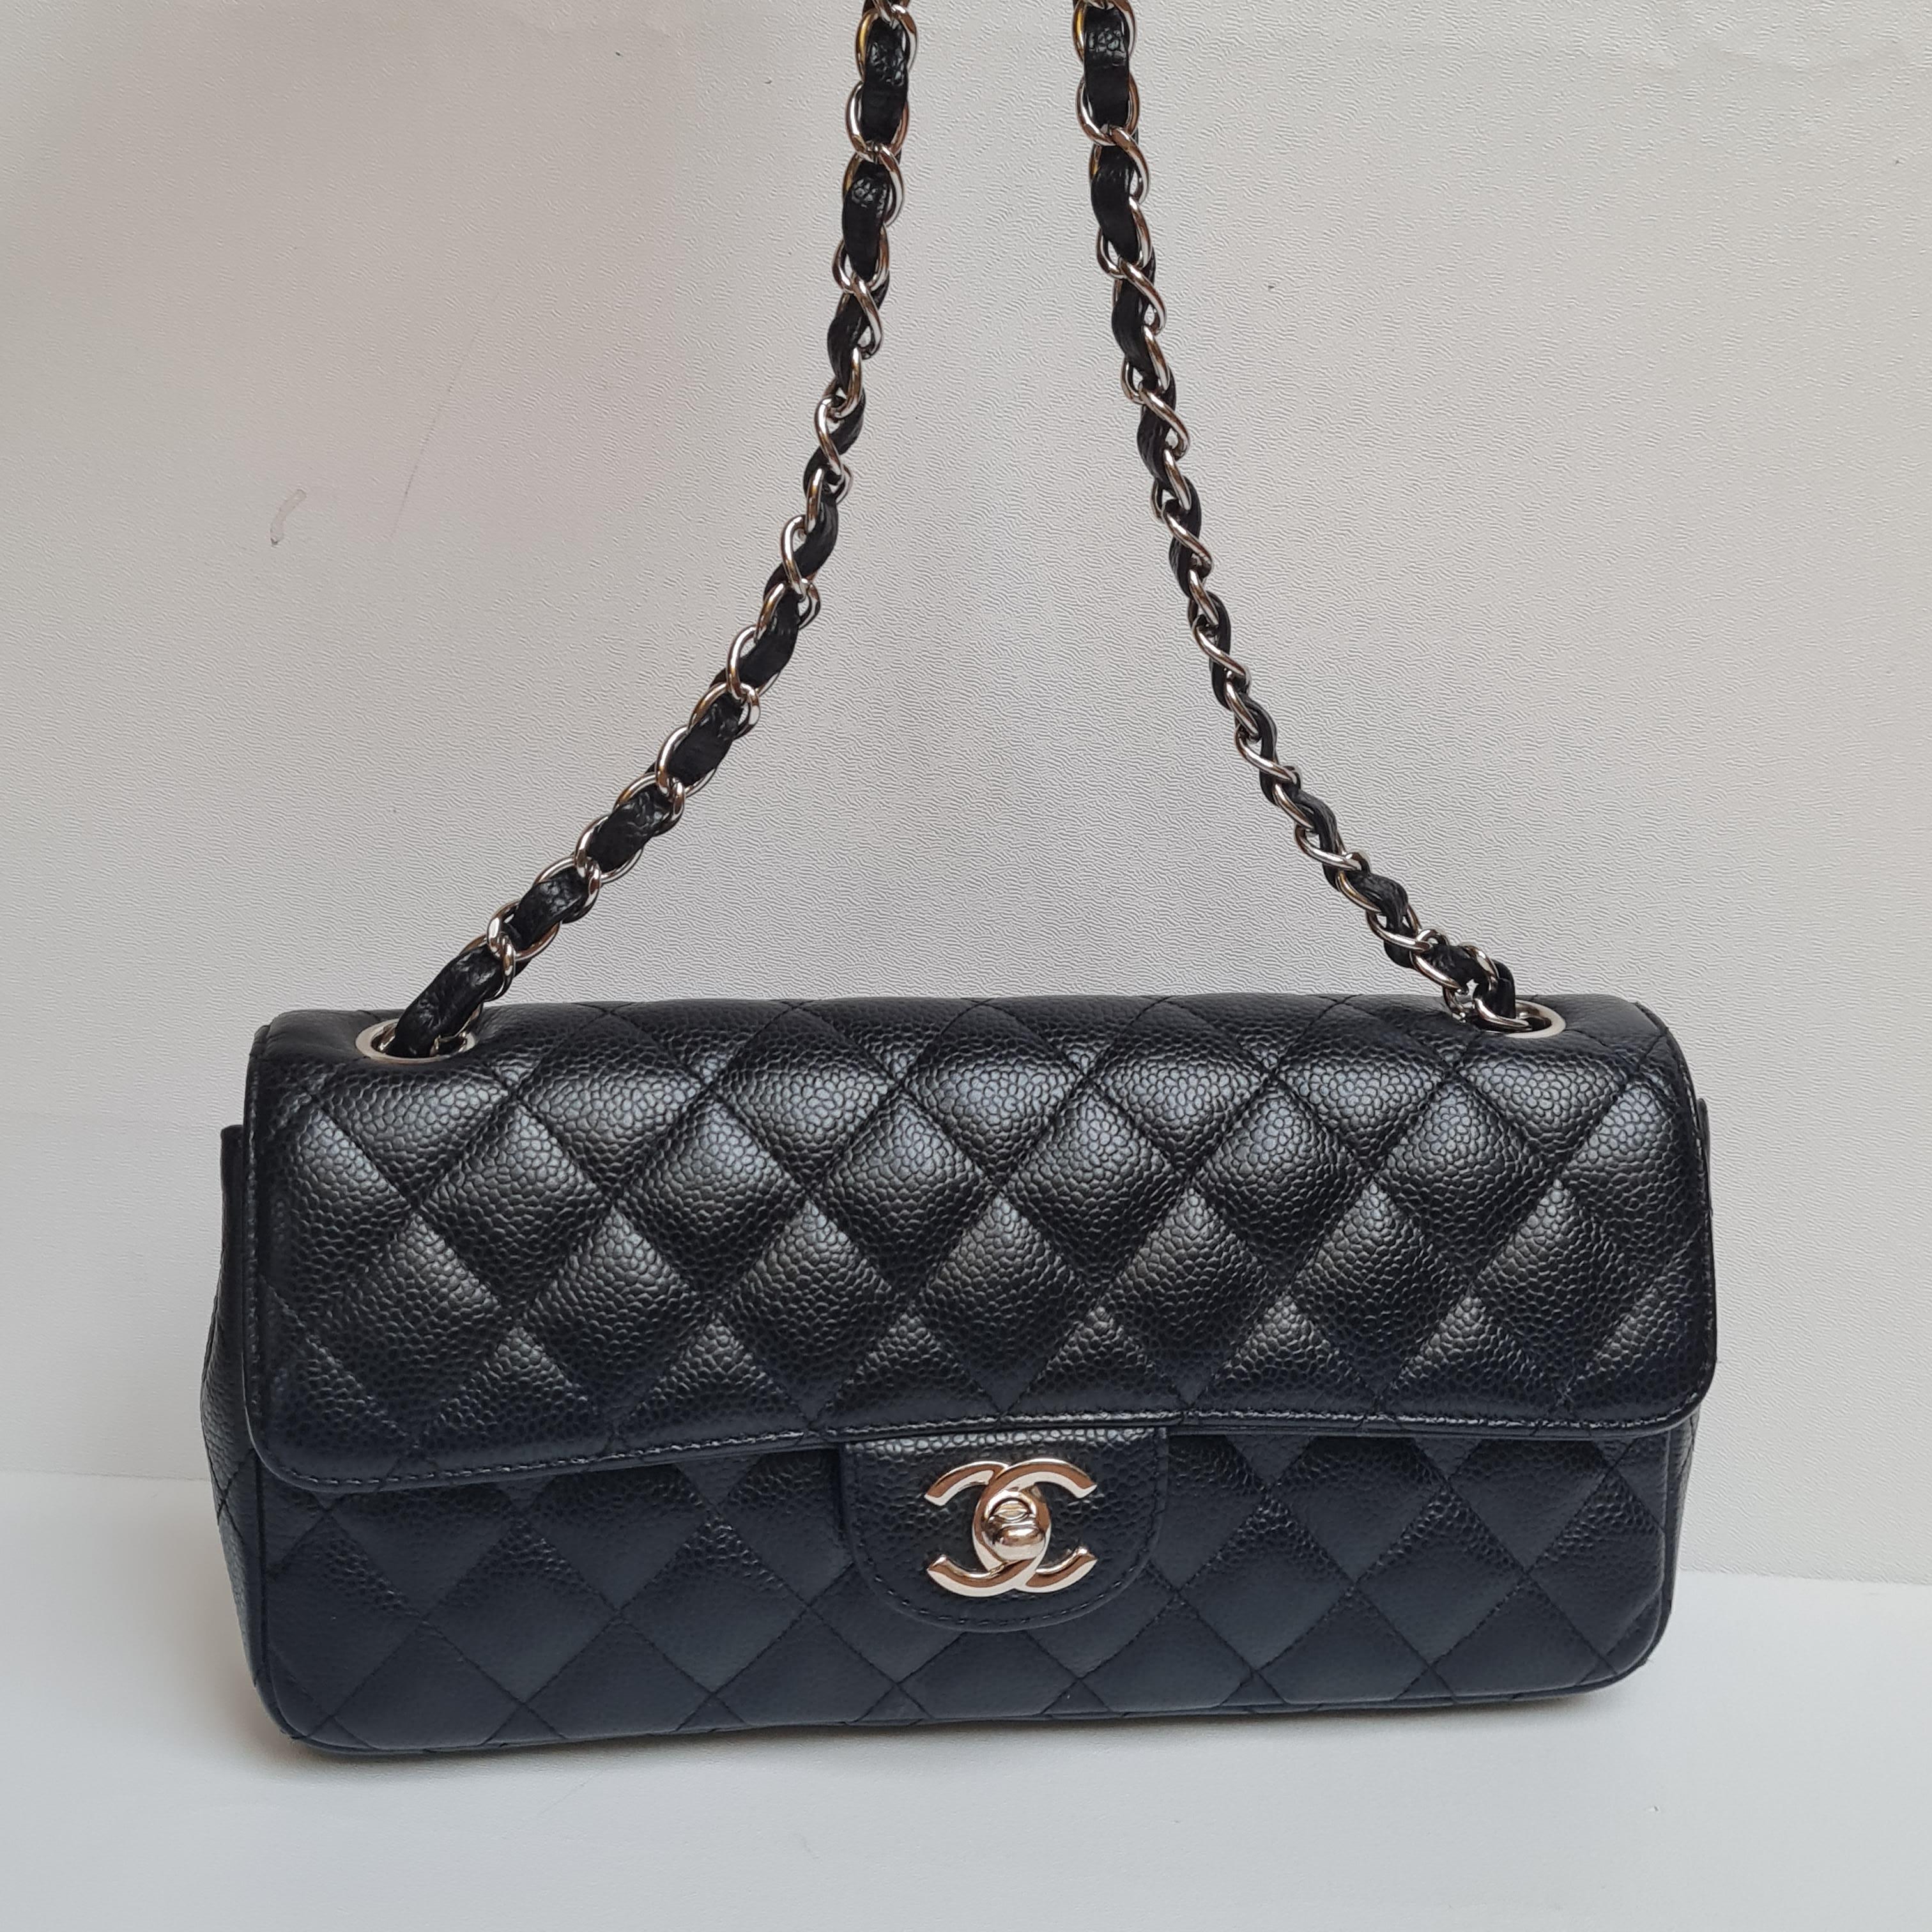 Chanel Black Caviar Quilted East West SHW Flap Bag 5